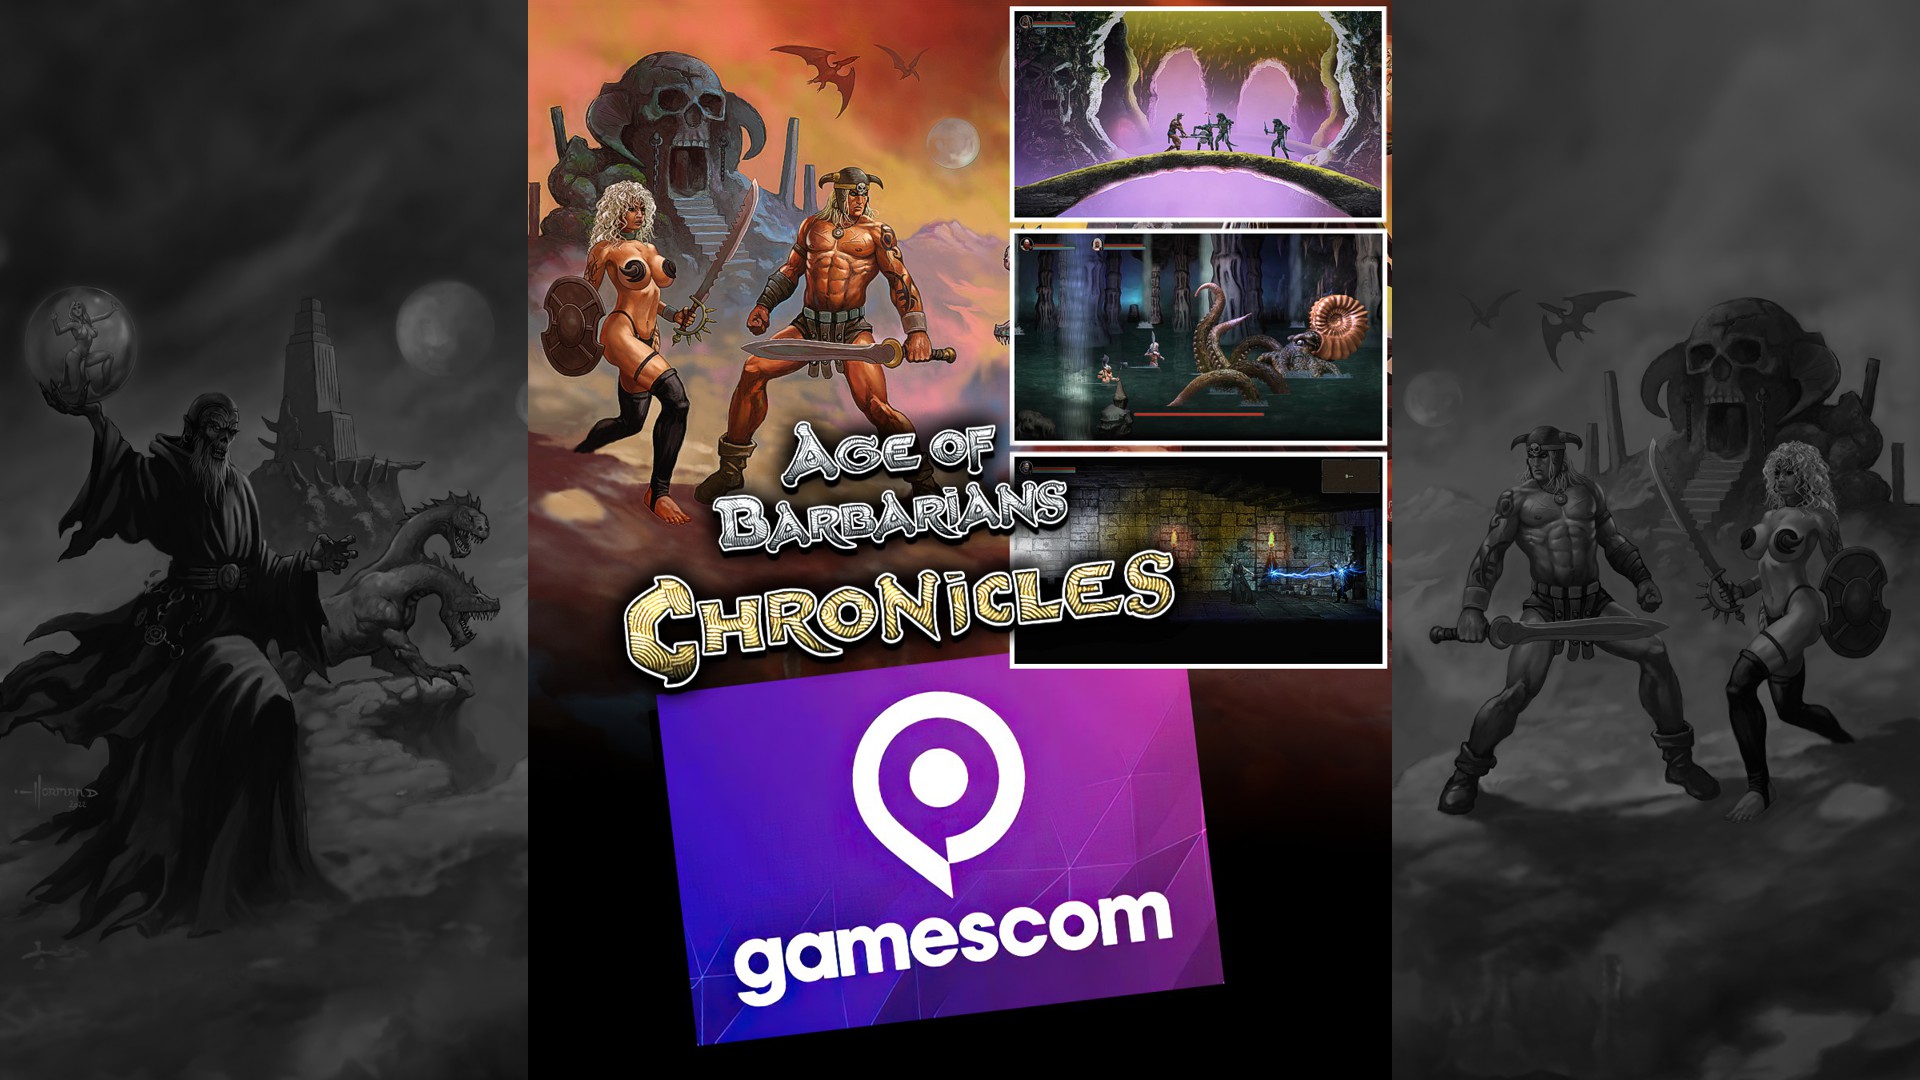 Age of Barbarians Chronicles Gam